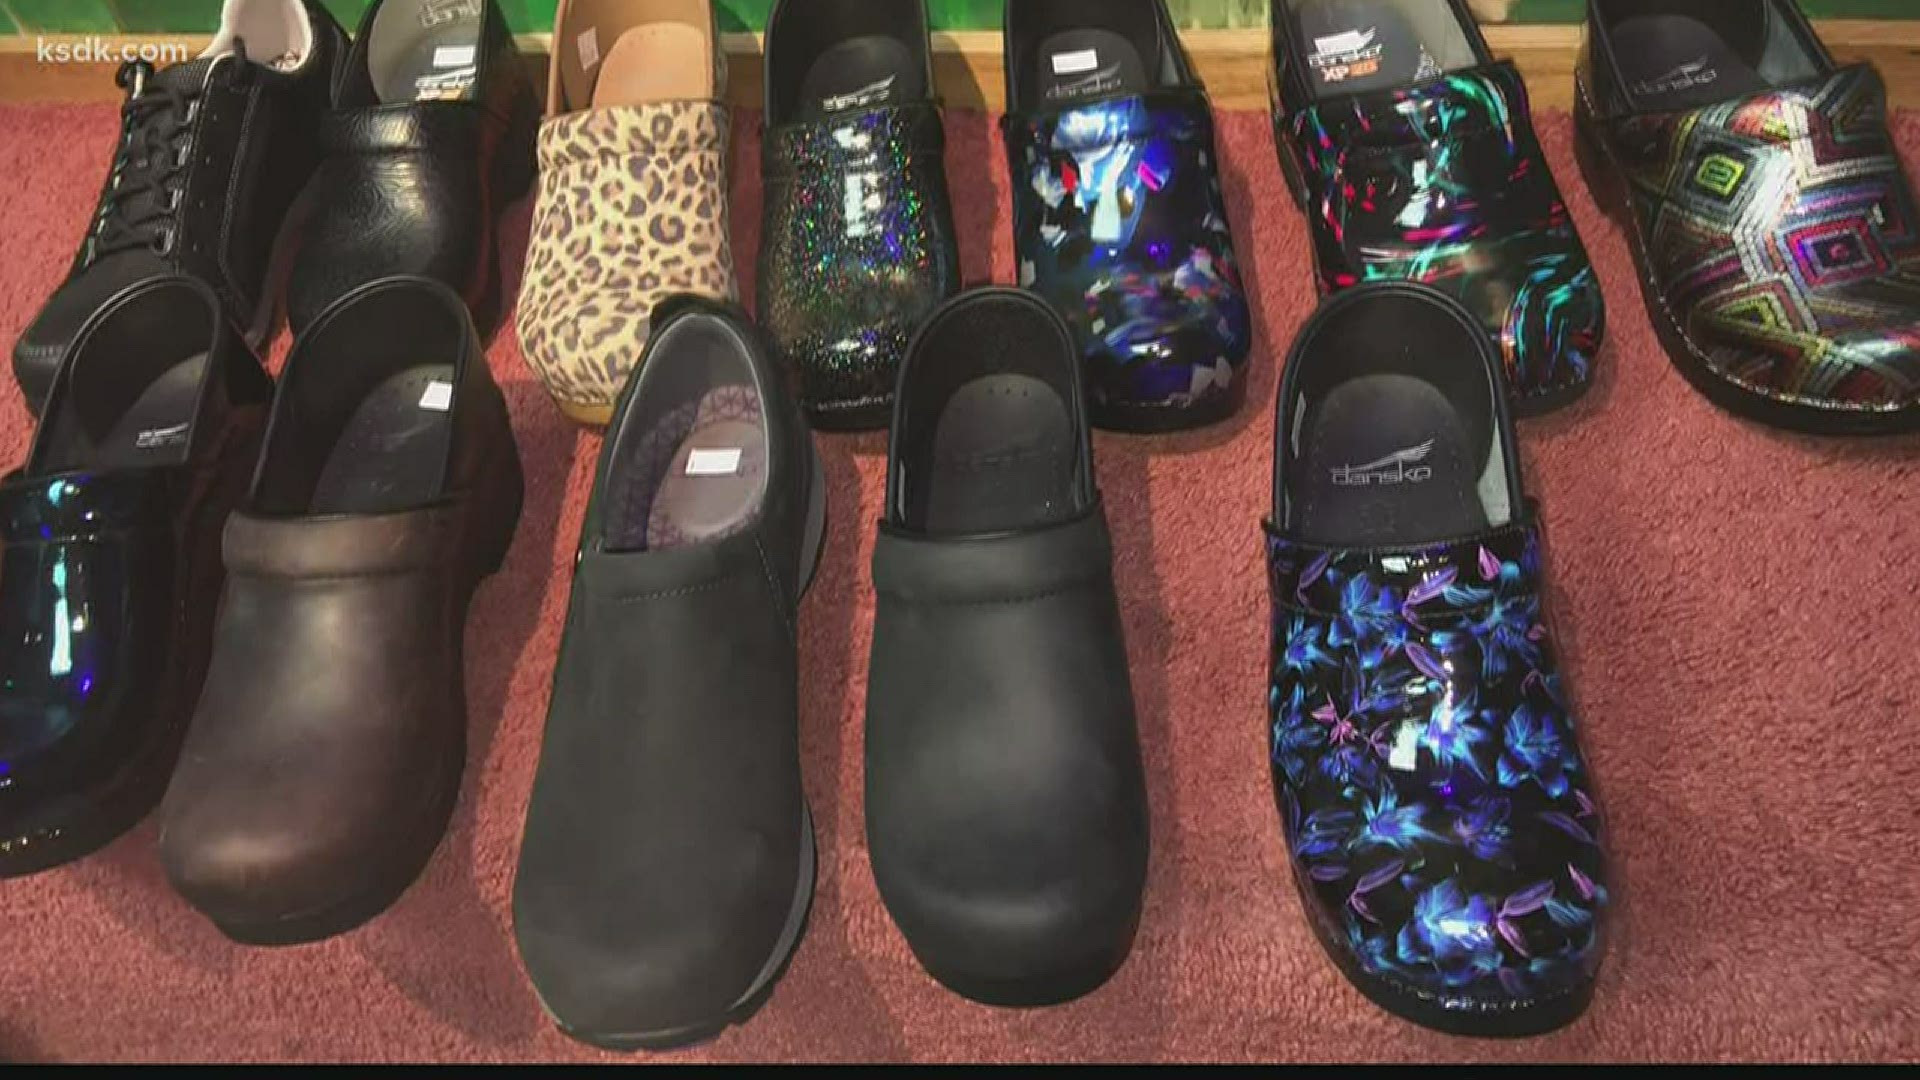 A local shoe store is stepping in to help health care workers on their feet for hours on end on the front lines of the COVID-19 pandemic